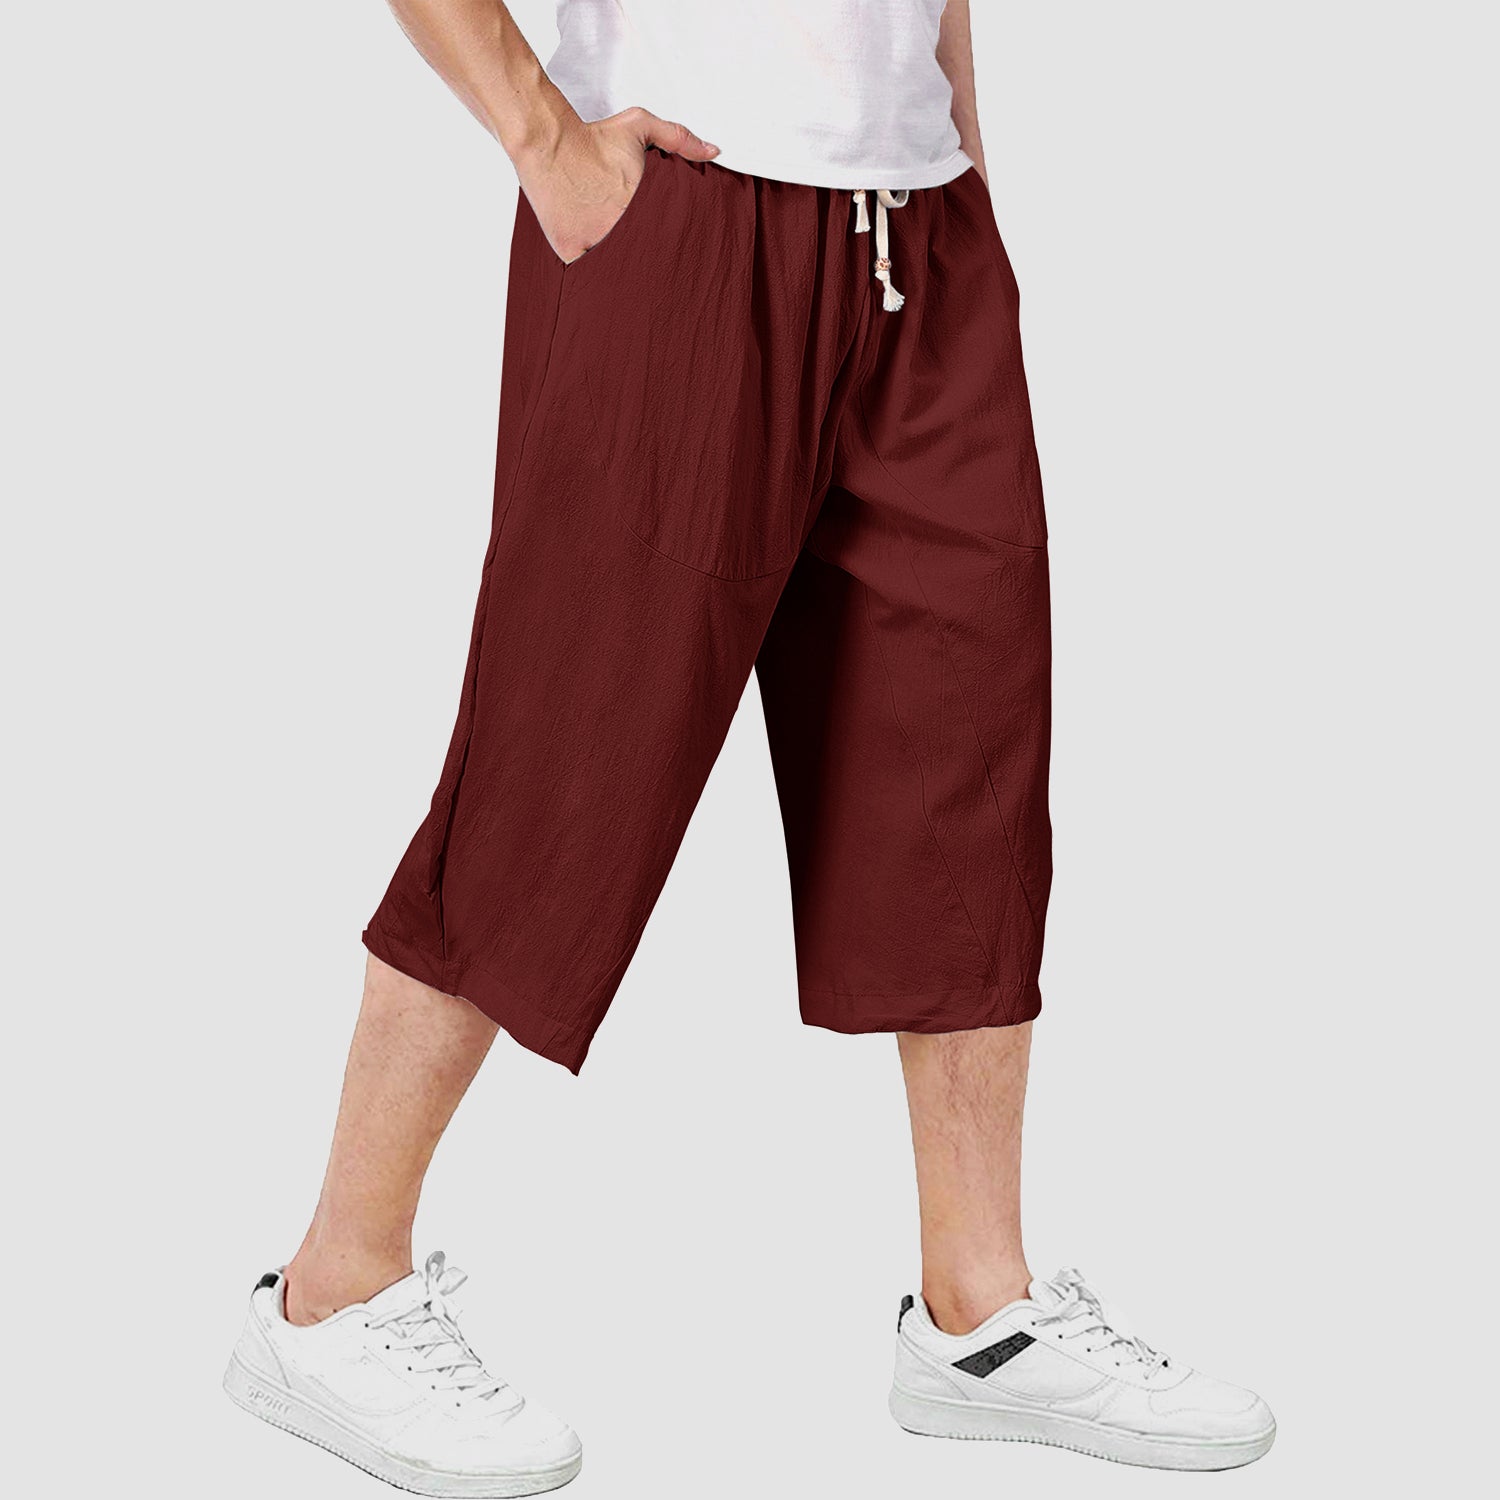 Amazon.com: hhaappyy Men's Baggy Linen Capri Pants, Casual Solid Color  Loose Elastic Waist Drawstring Harem Yoga Long Shorts with Pockets :  Clothing, Shoes & Jewelry